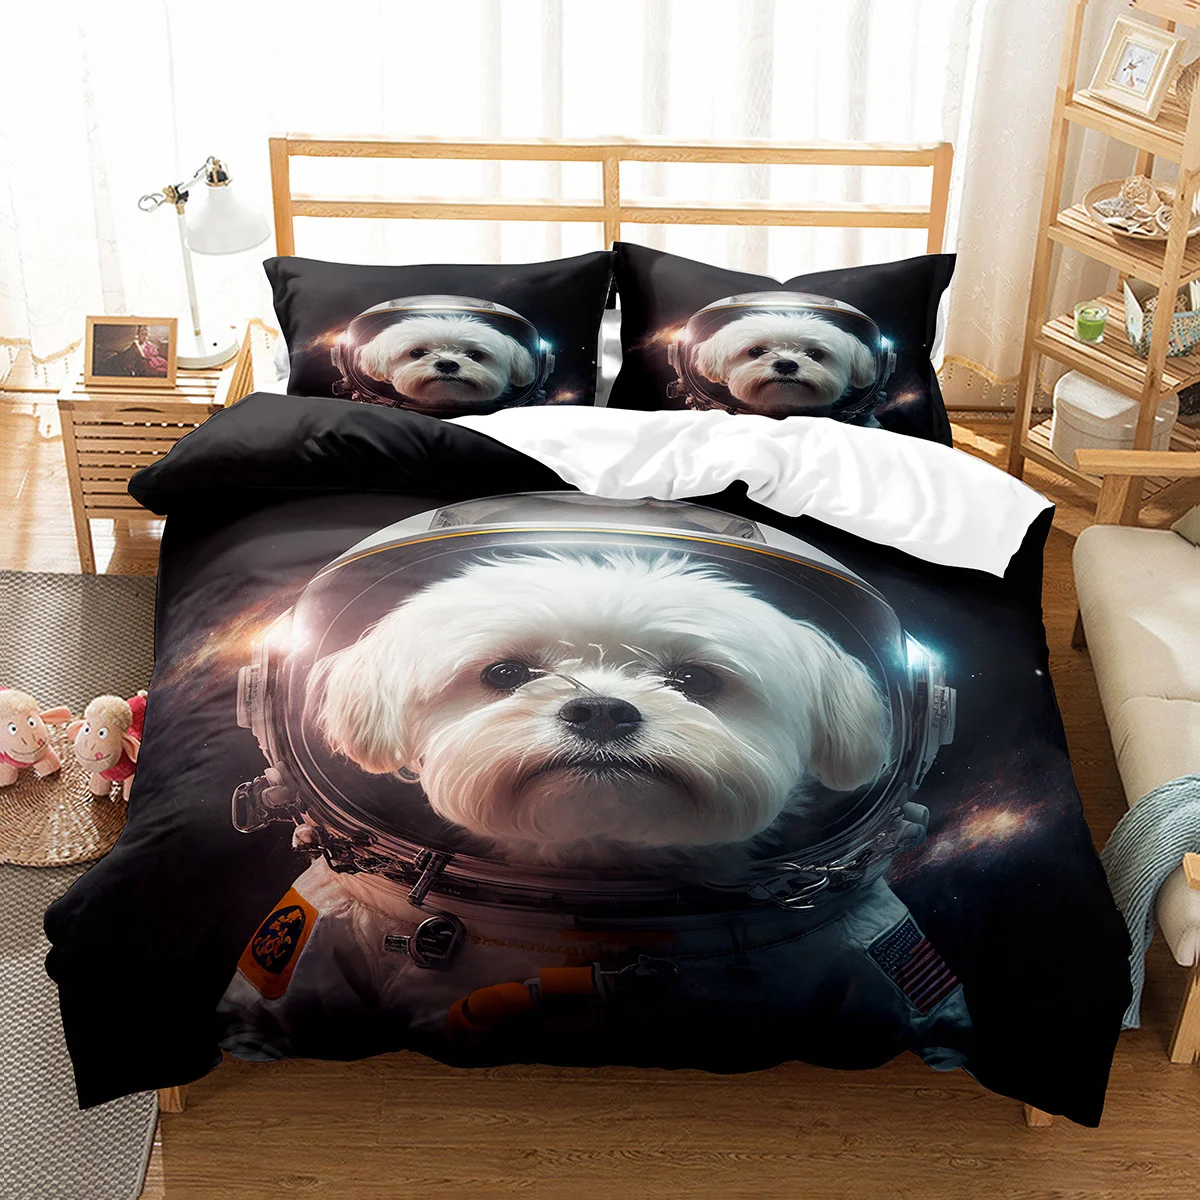 Space Cat King Queen Duvet Cover Cute Astronaut Kitty Bedding Set Universe Pet Animal Dog Quilt Cover Polyester Comforter Cover images - 6